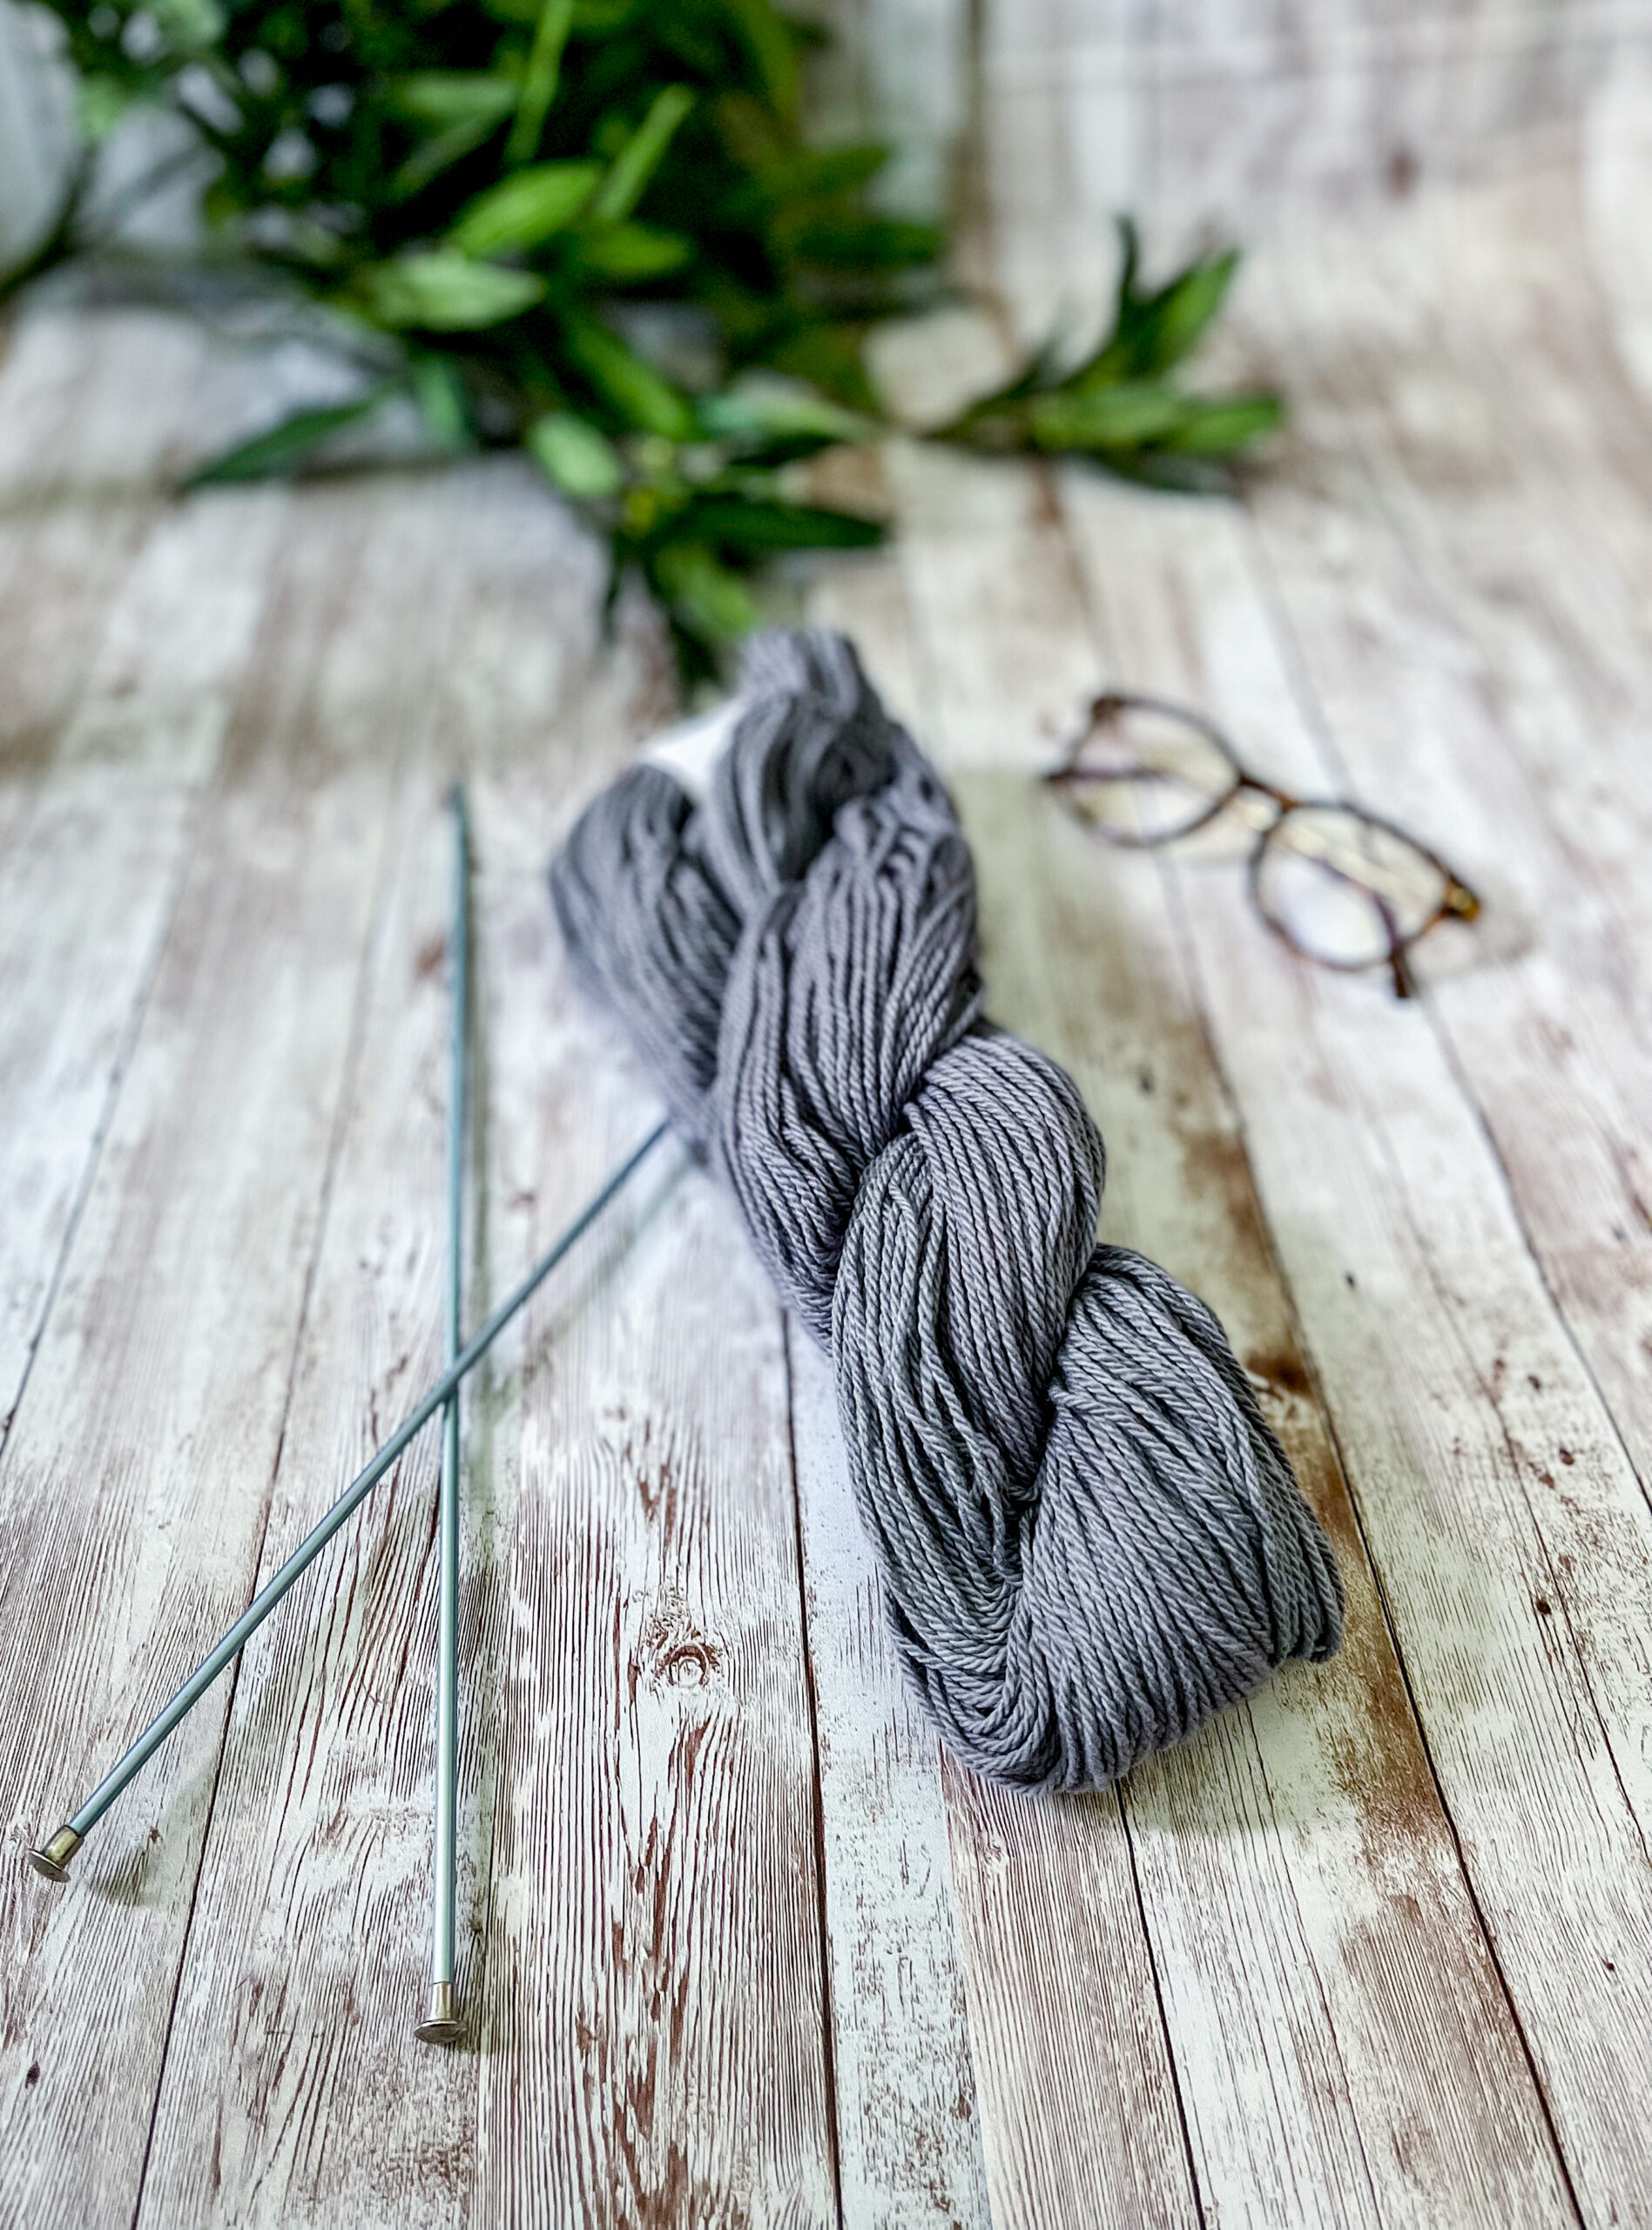 A skein of gray Virginia-grown cotton rests on a wood panel, with a pair of knitting needles, reading glasses and greenery around it